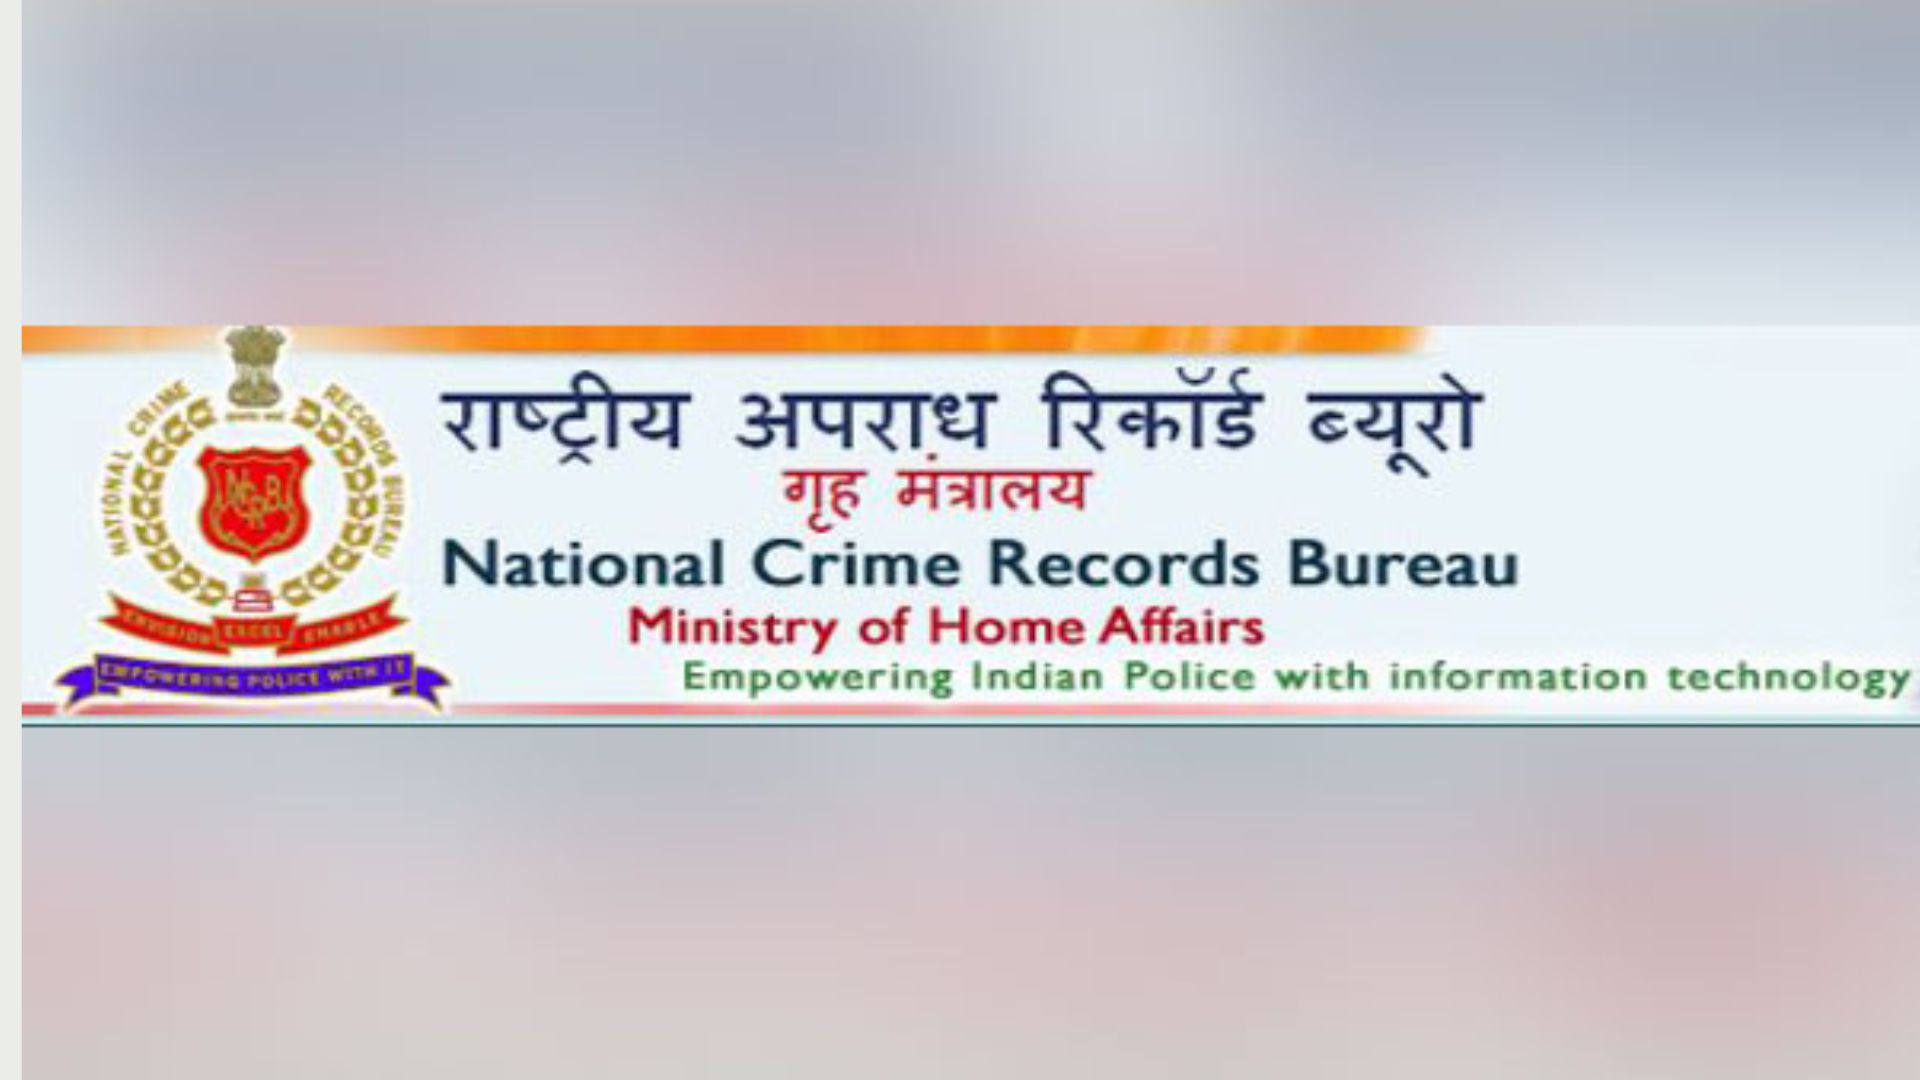 Cyber Crime Surges Across India! Shocking Stats Revealed in Latest NCRB Report – Check here